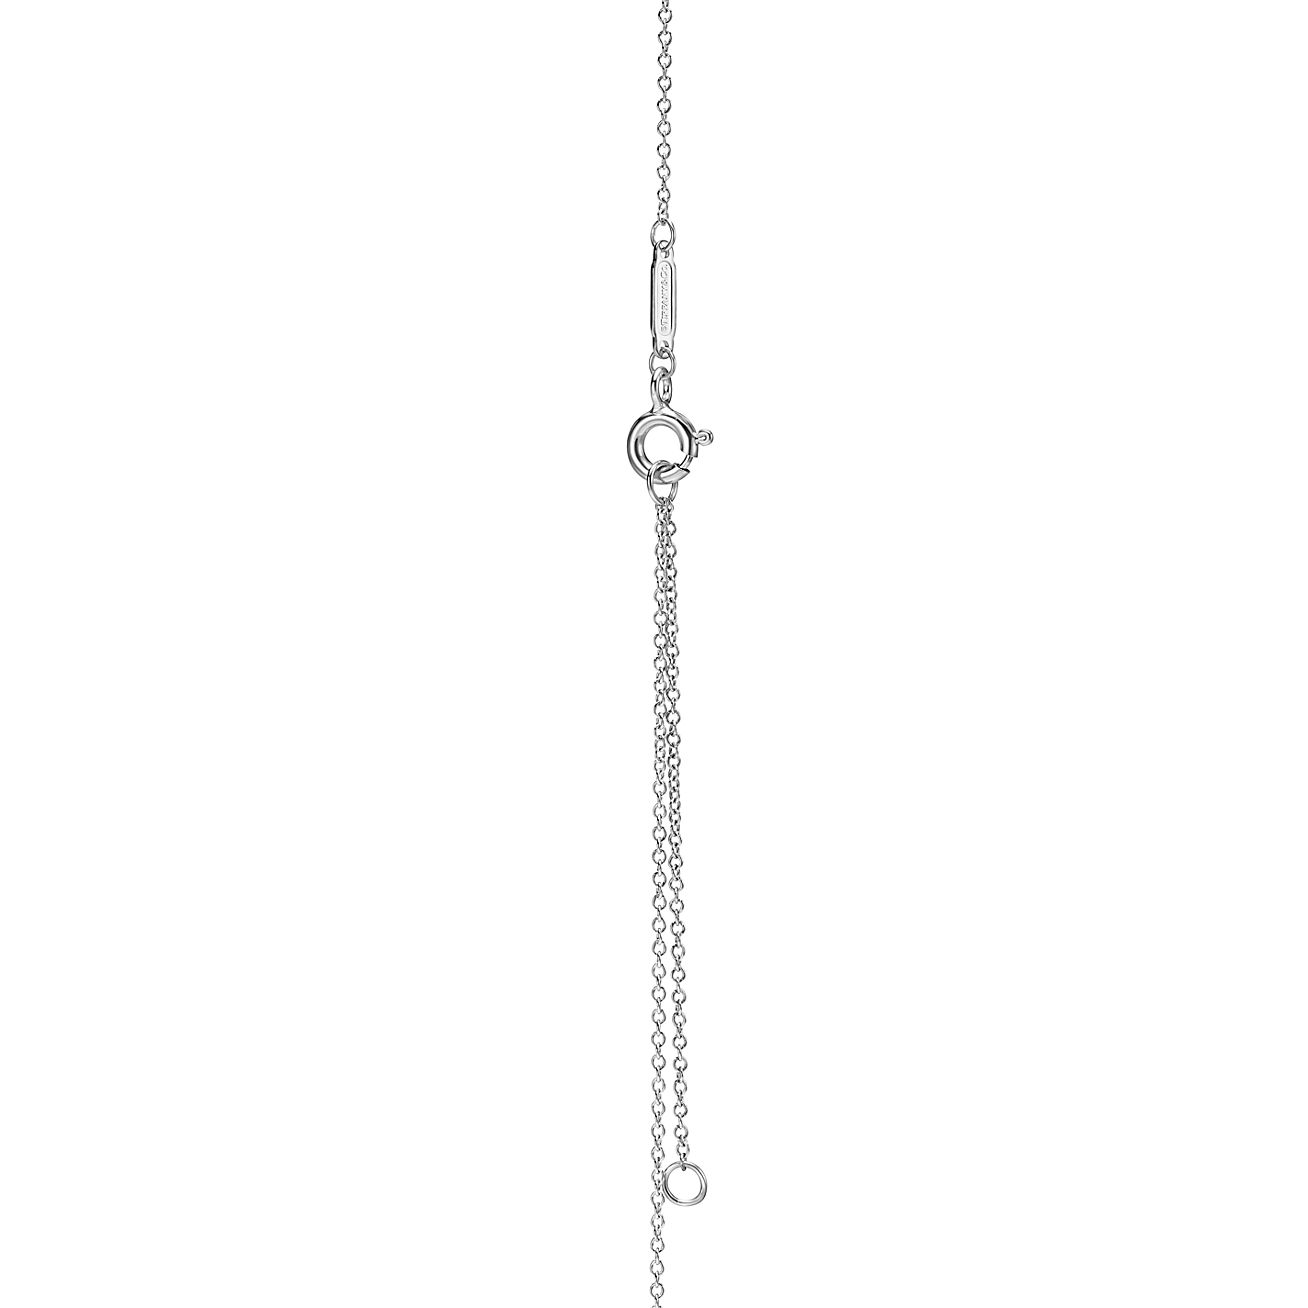 Return to Tiffany™ small heart tag in sterling silver on a bead necklace.